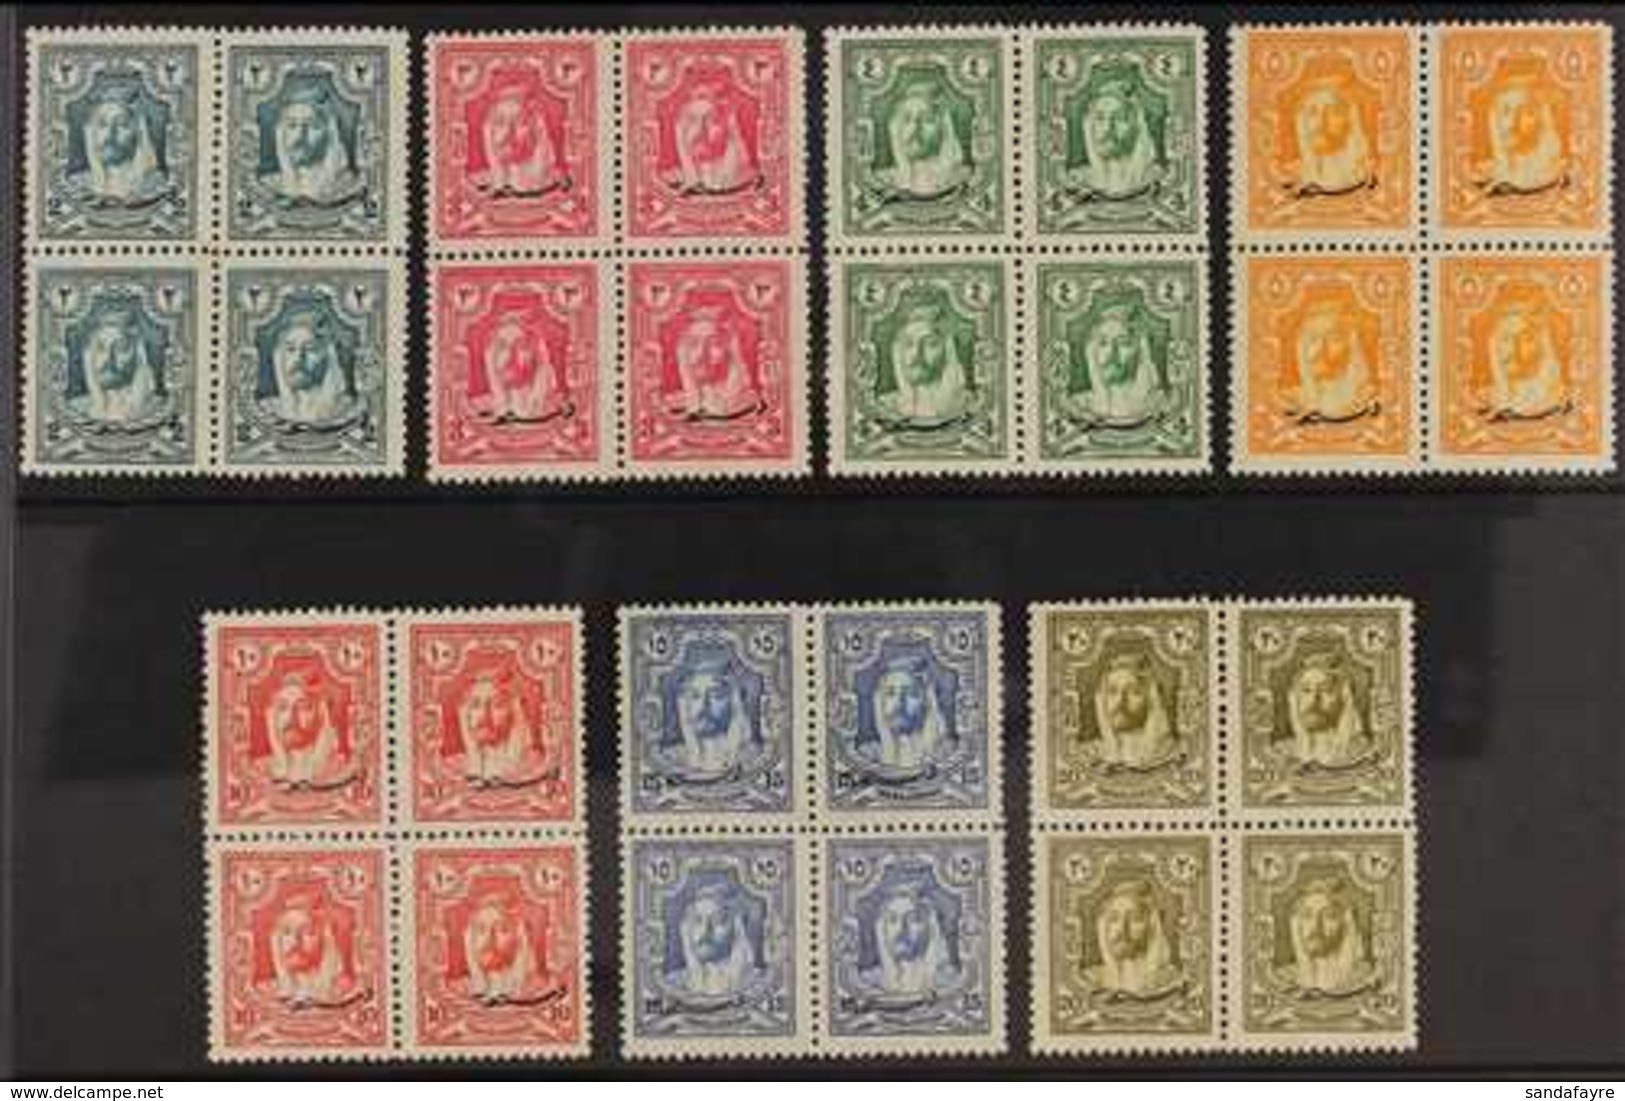 1928  New Constitution Overprints Complete Set To 20m, SG 172/78, Superb Never Hinged Mint BLOCKS Of 4, Very Fresh. (7 B - Jordanie